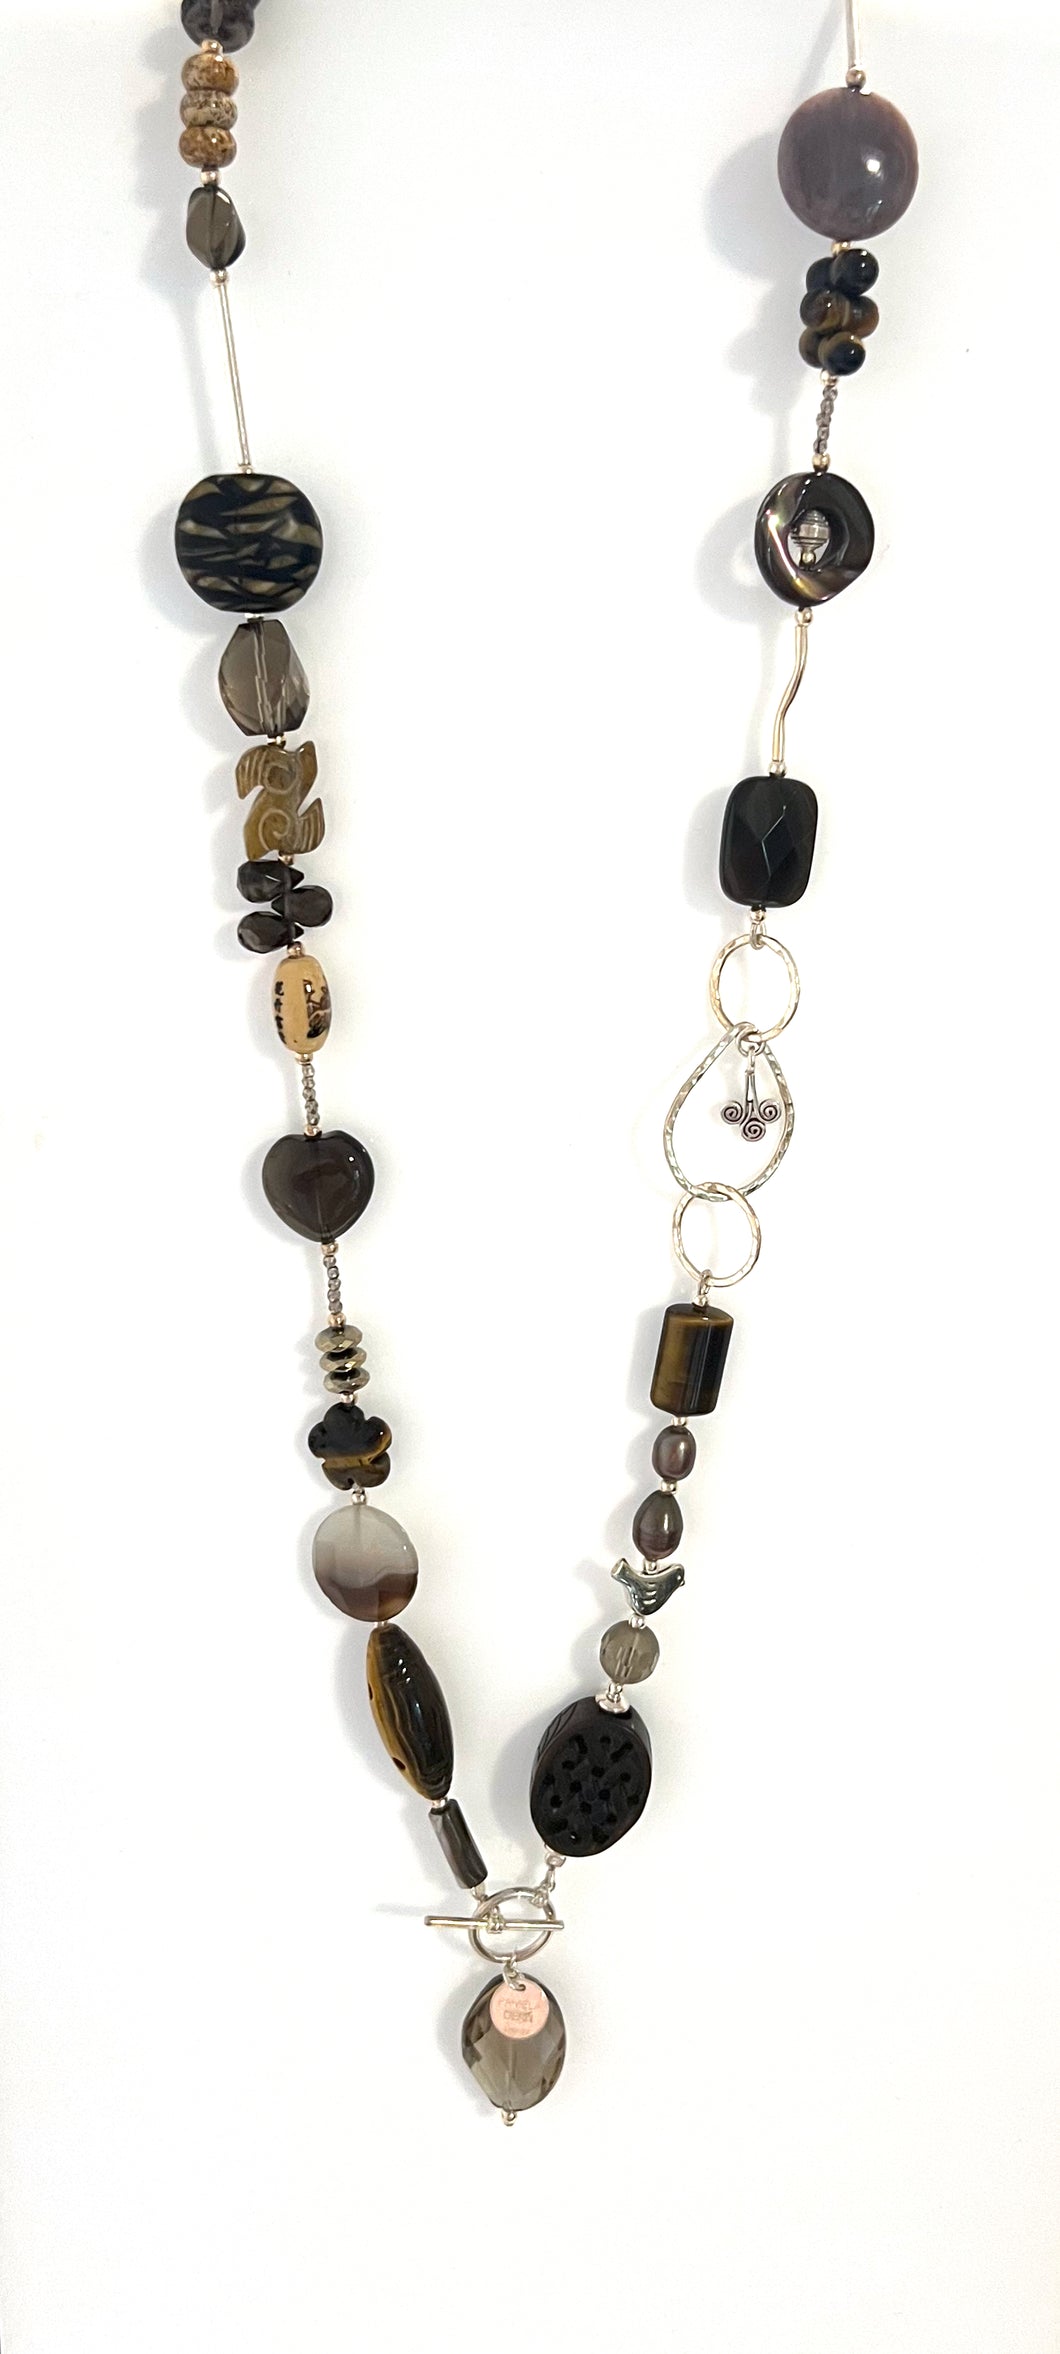 Australian Handmade Brown Fob Necklace with Smoky Quartz Agate Tigers Eye Jade and Sterling Silver